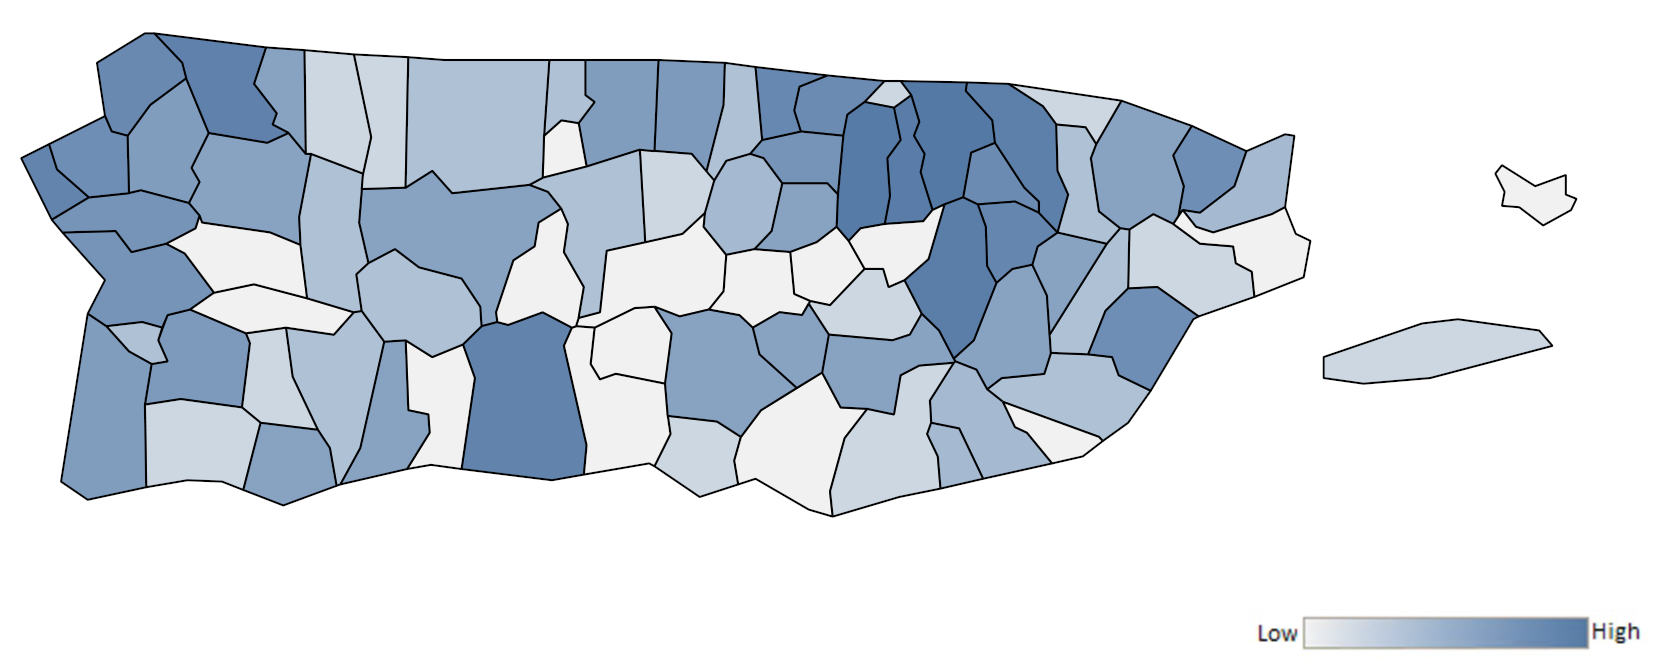 Map of Puerto Rico municipalities indicating relative number of complaints from low to high. See attached CSV file for complaint data by jurisdiction.